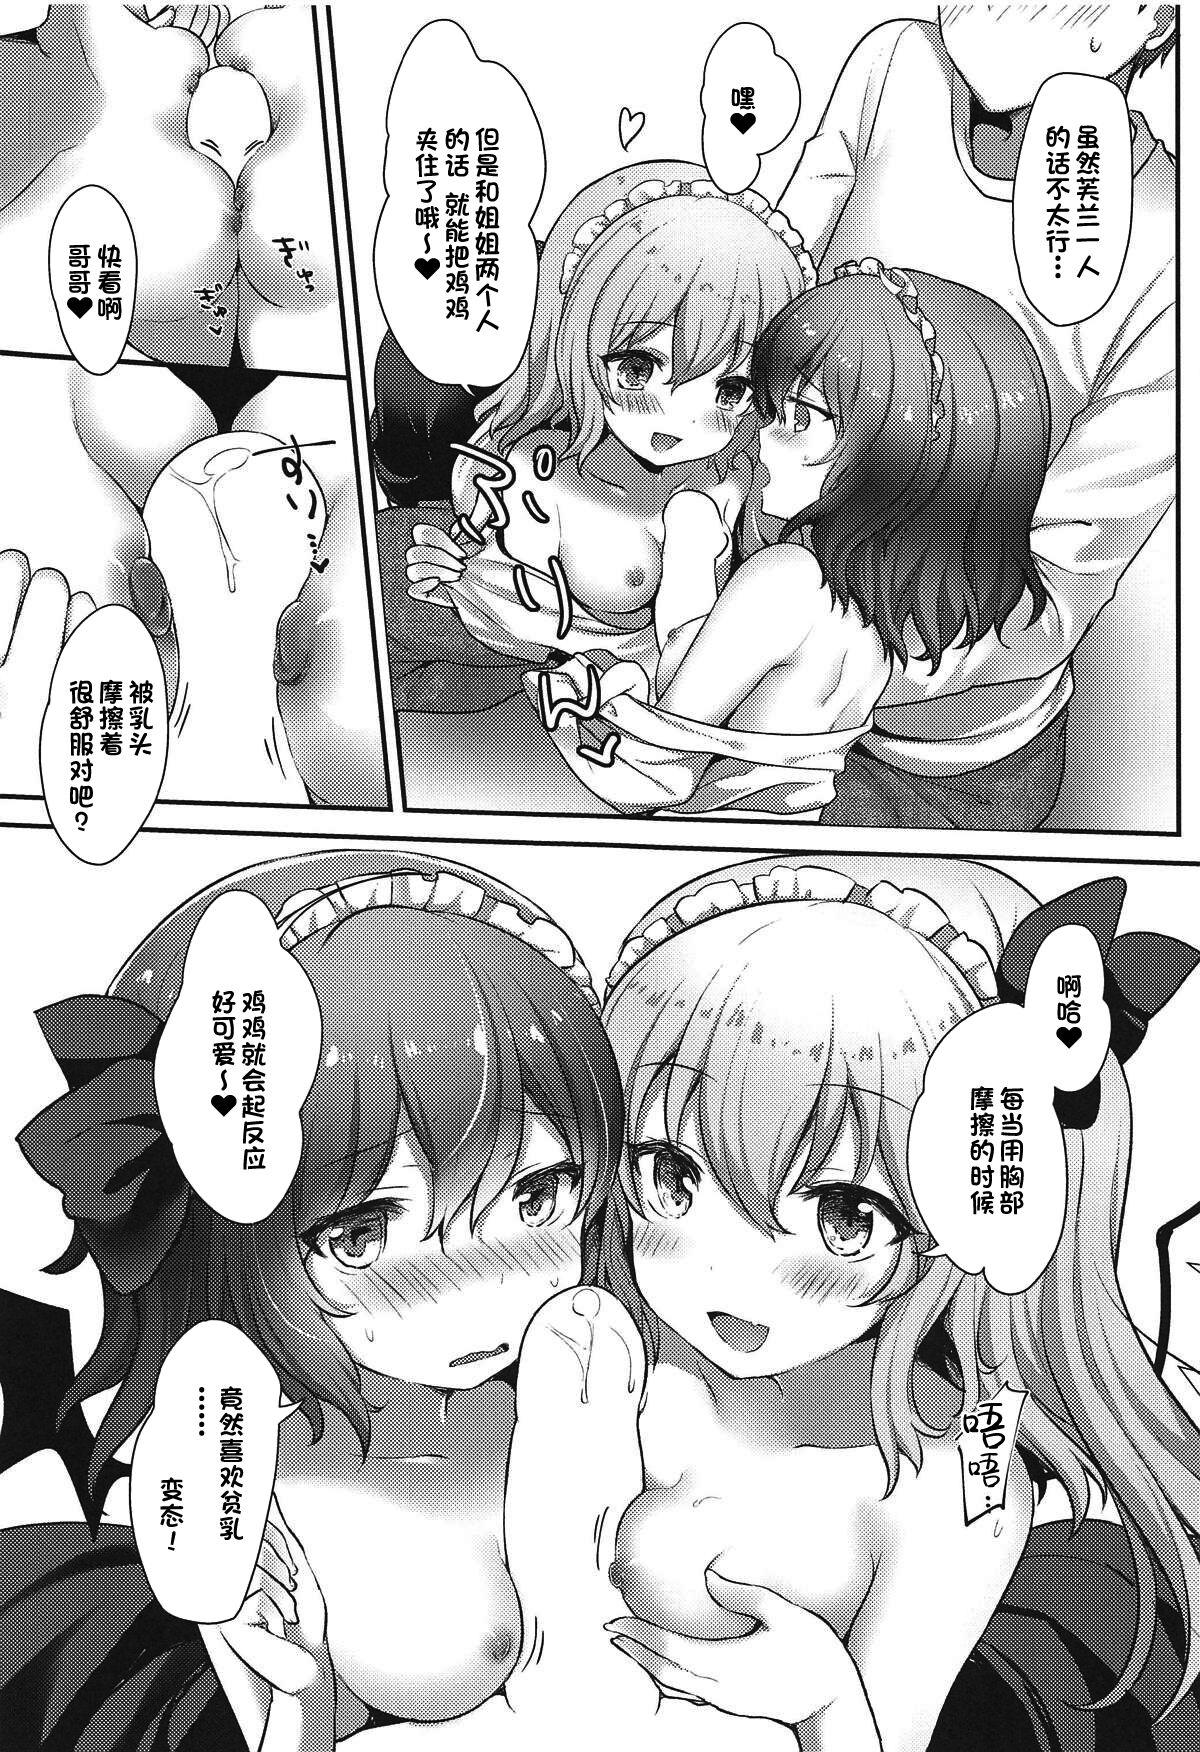 Hardcore Porn Maid Scarlet - Touhou project Pussy Sex - Page 8